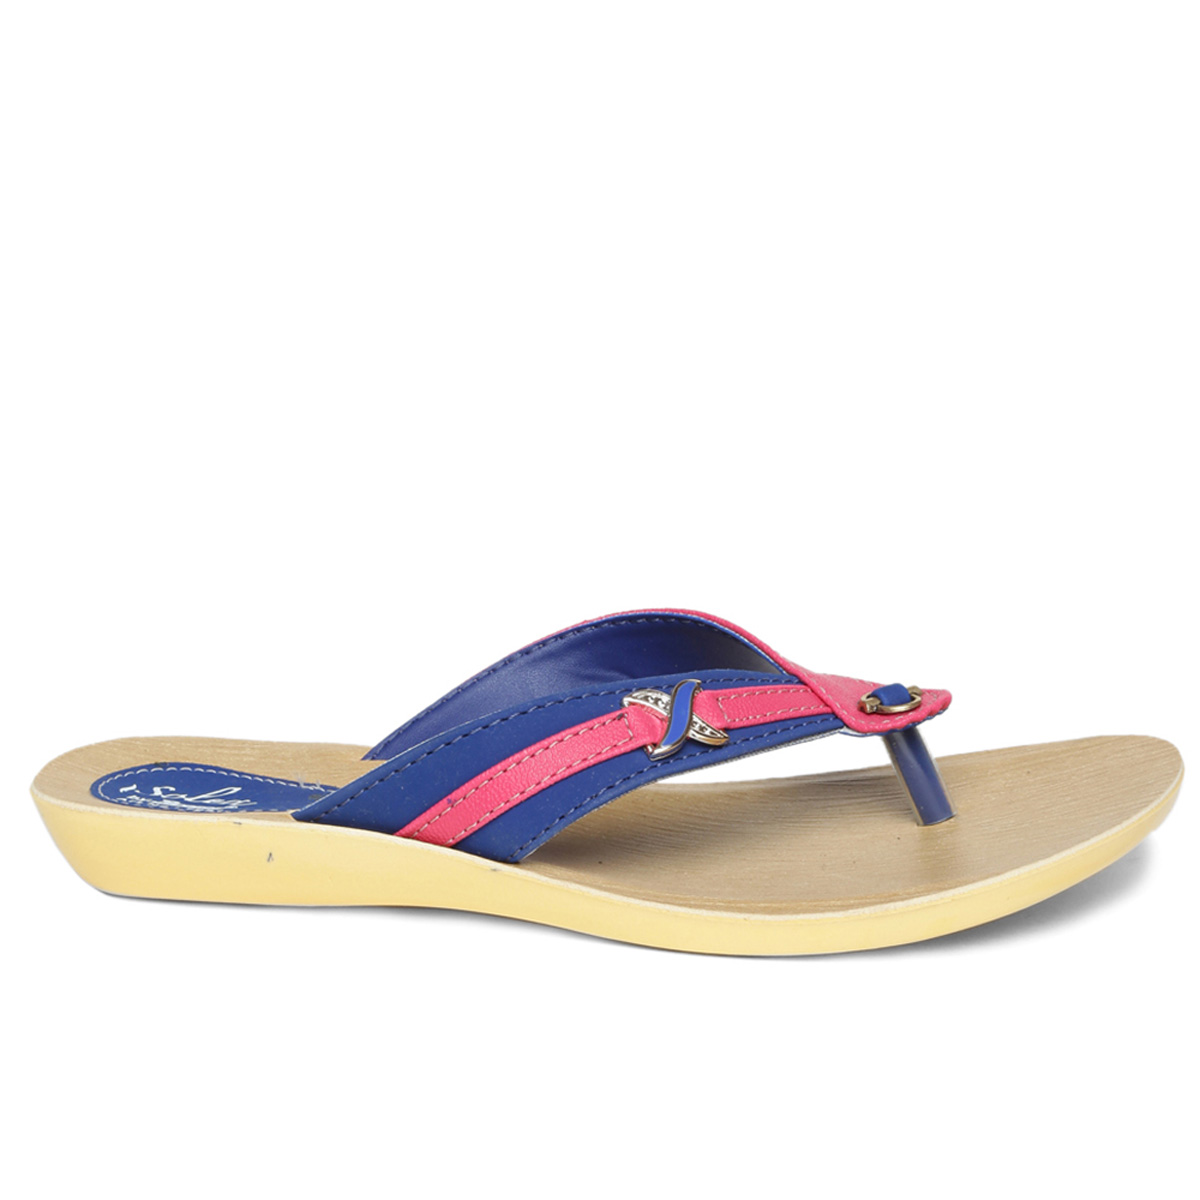 Buy Paragon Women'S Pink Slippers Online @ ₹229 from ShopClues